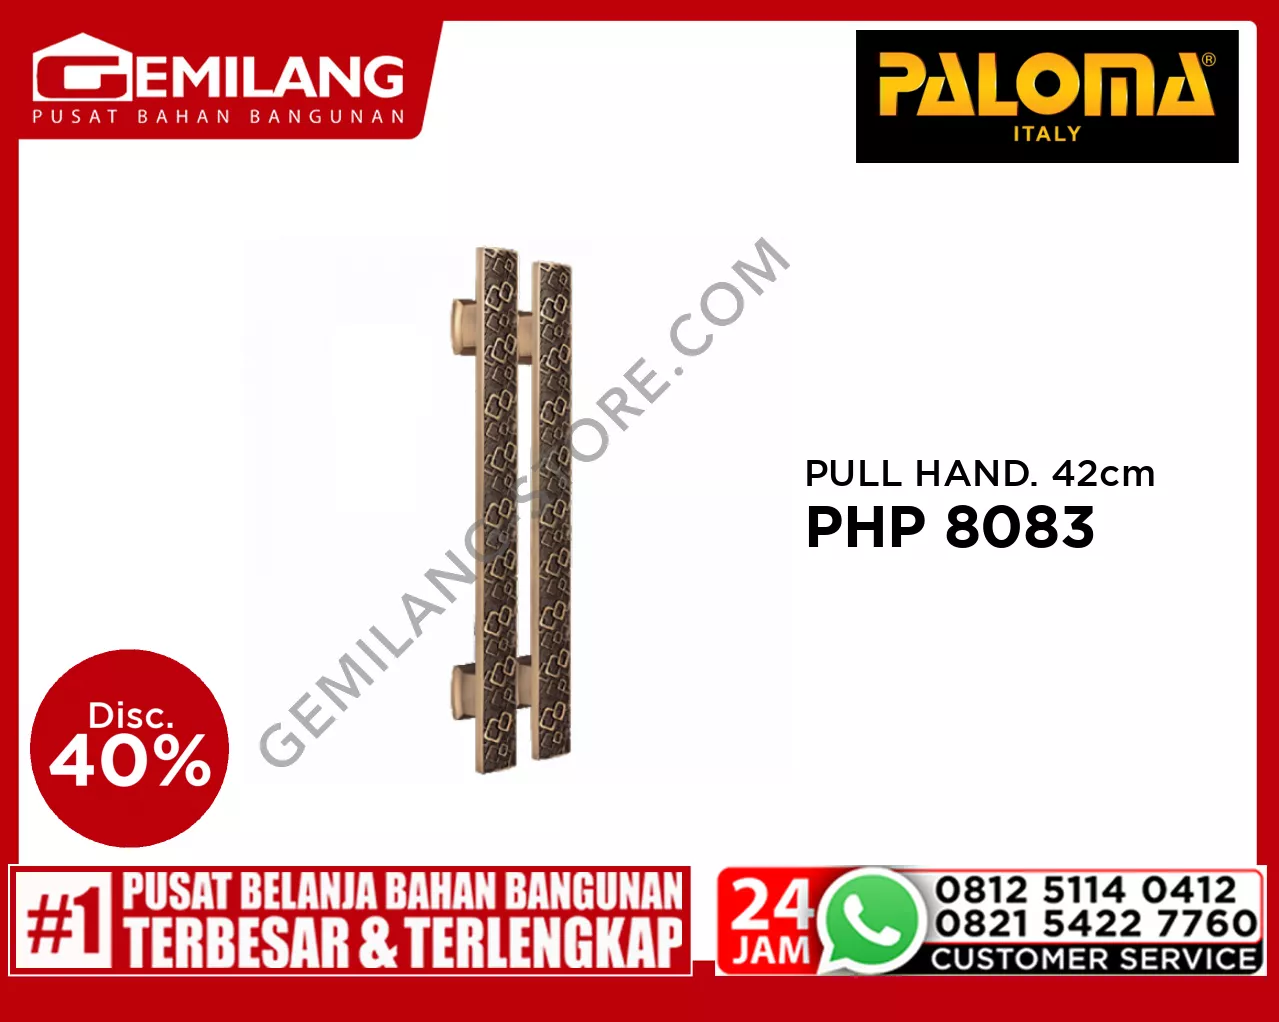 PALOMA PULL HANDLE MONZA 420mm MAC PHP 8083